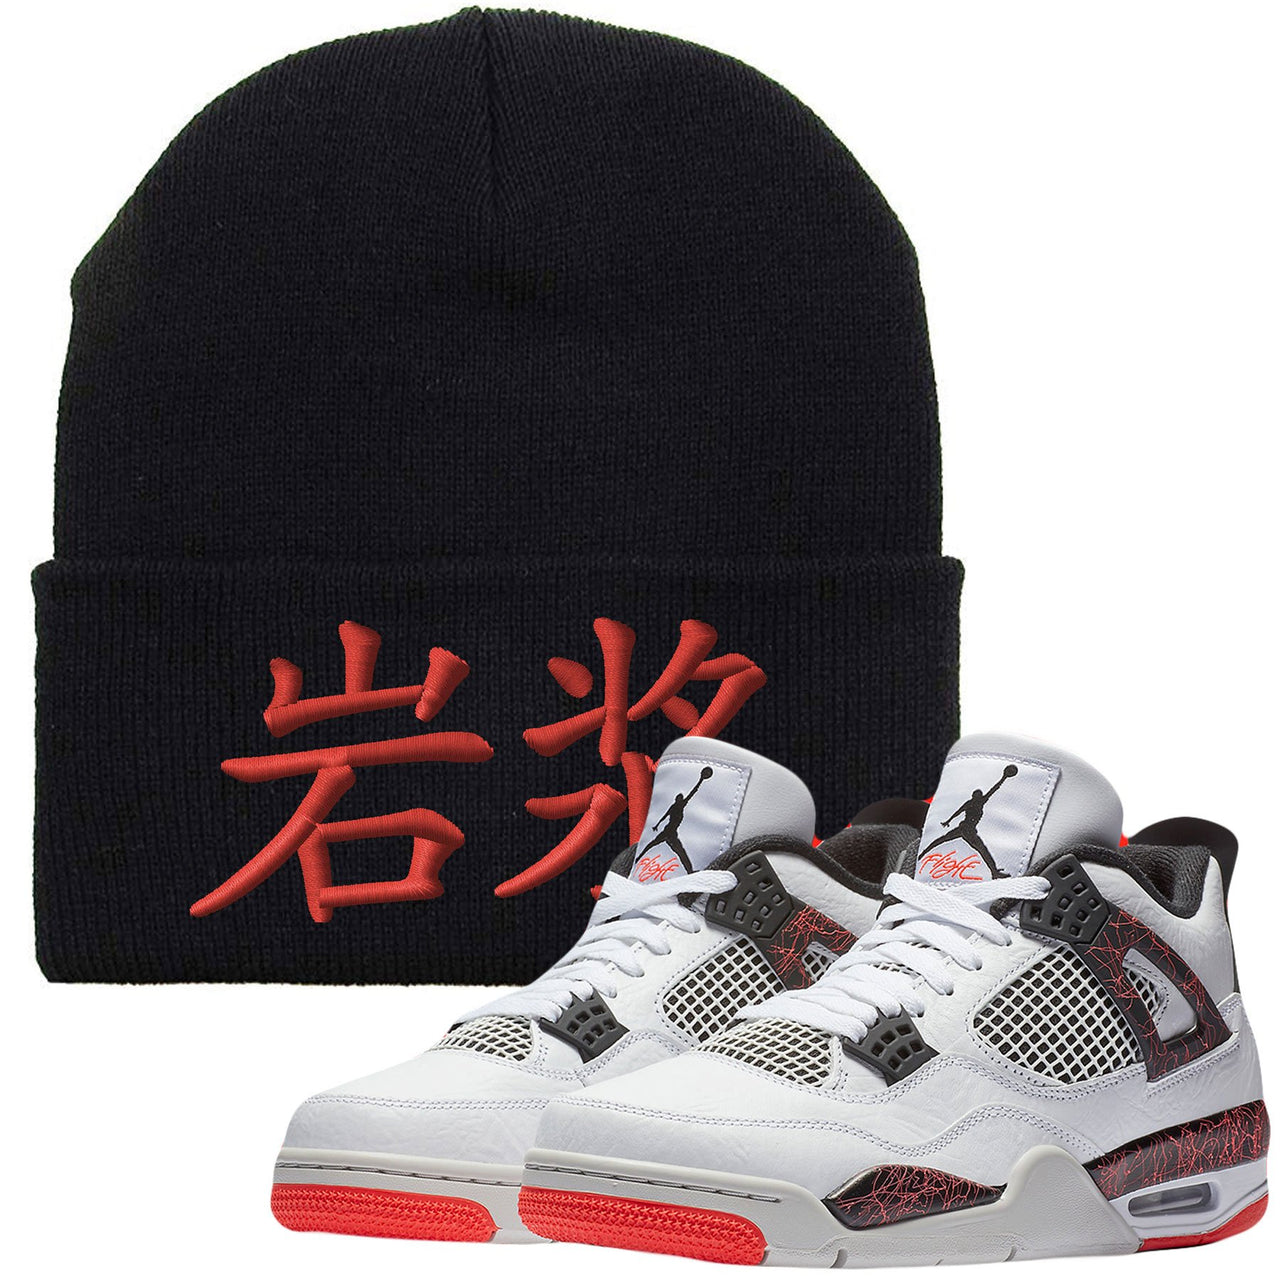 Match your pair of Jordan 4 Pale Citron "Hot Lava 4s" sneakers with this sneaker matching beanie